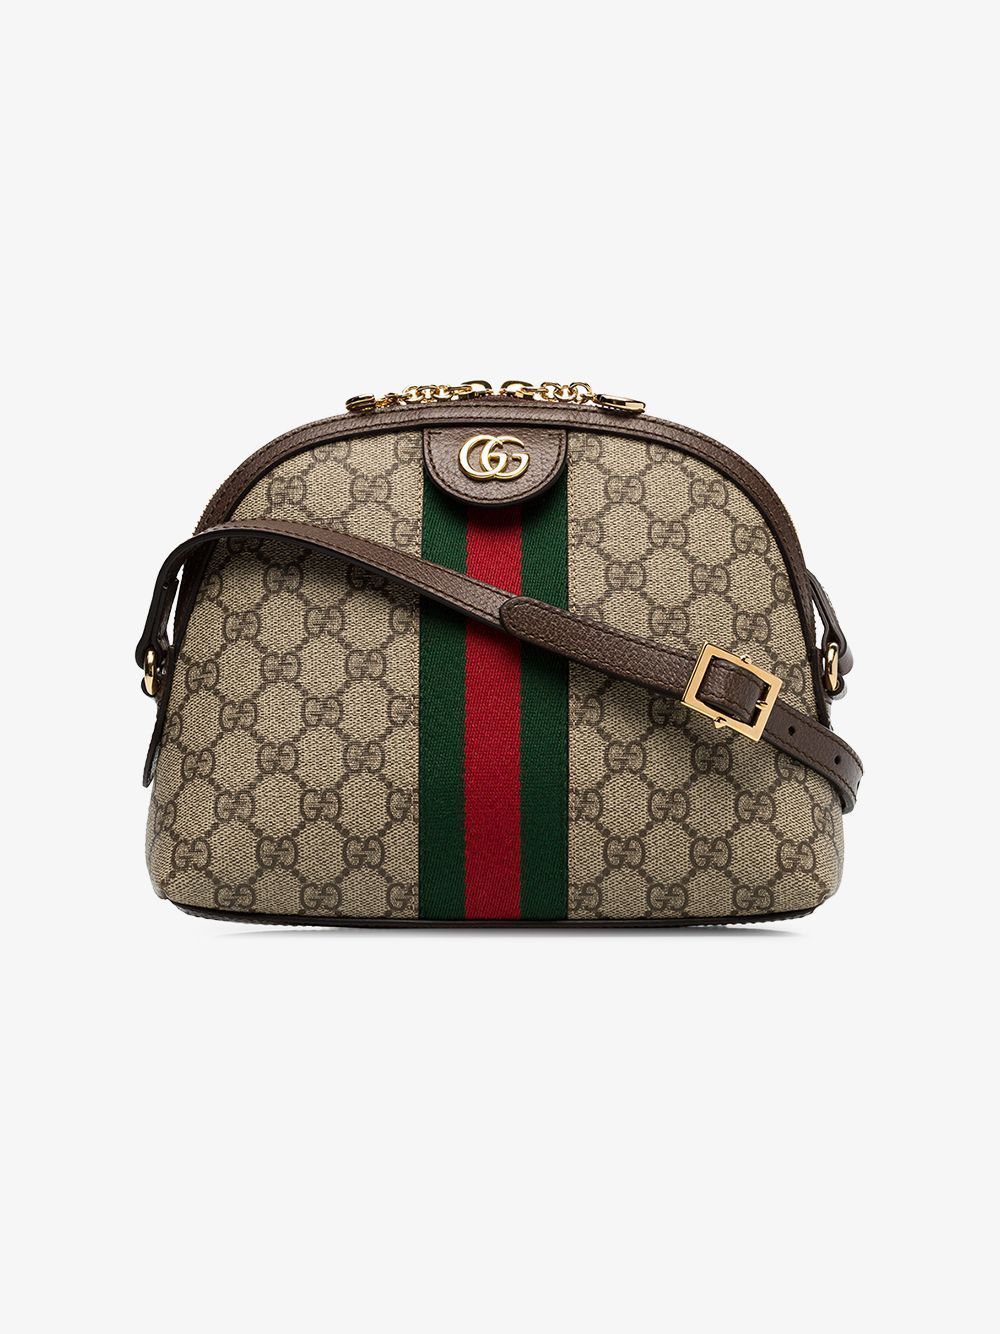 Gucci brown Ophidia small GG Supreme shoulder bag | Browns Fashion